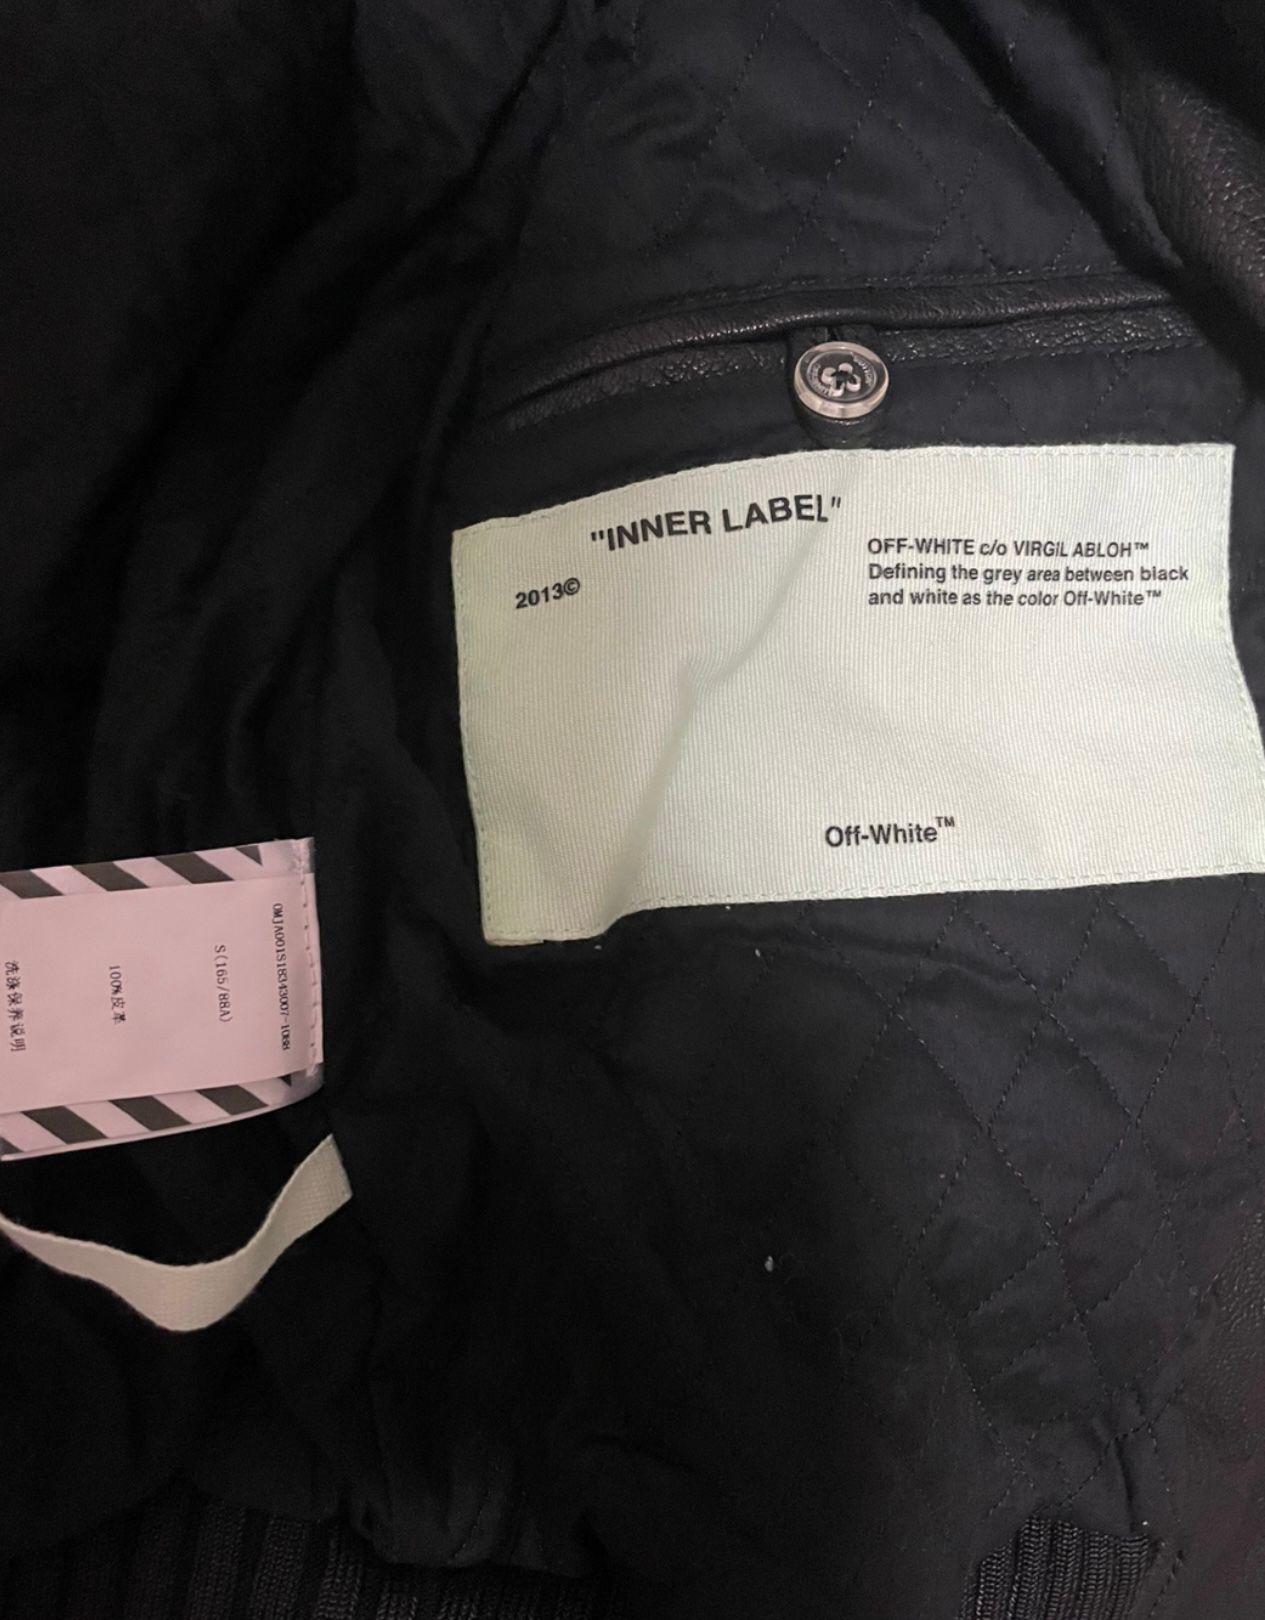 Off-white A2 Lambskin Leather Jacket S - 9